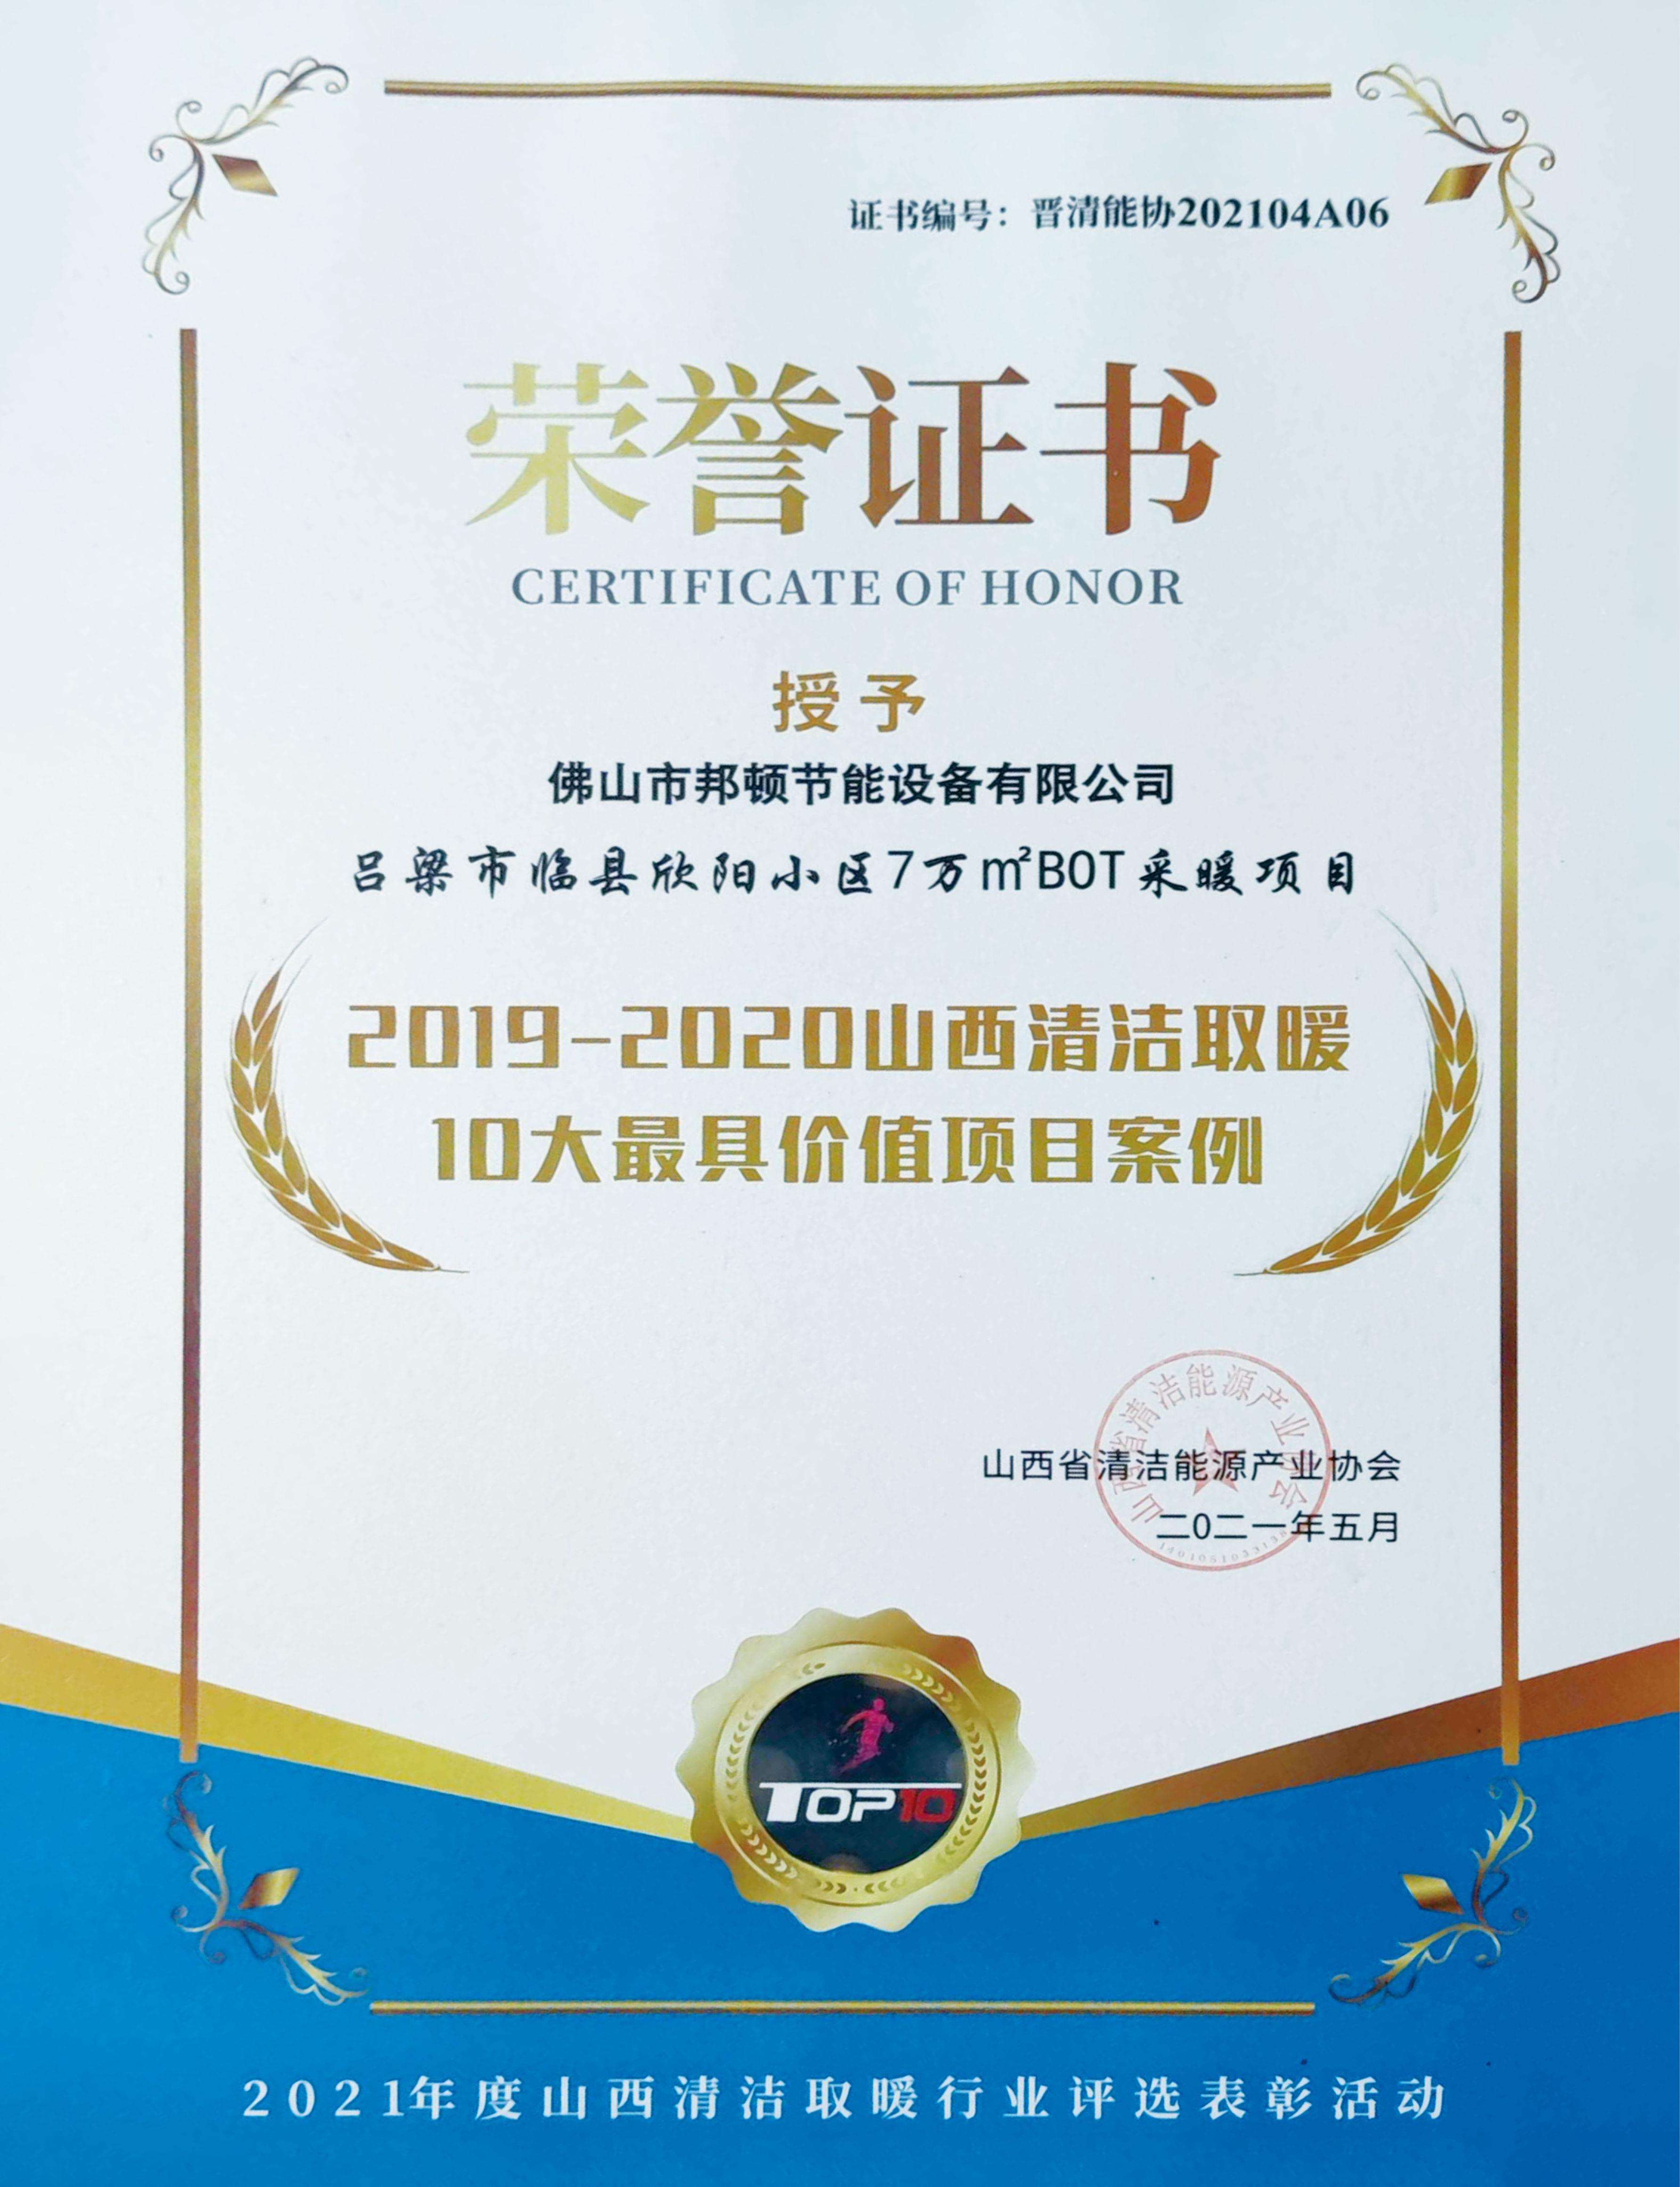 2019-2020: Shanxi's Top 10 Clean Heating Project Cases